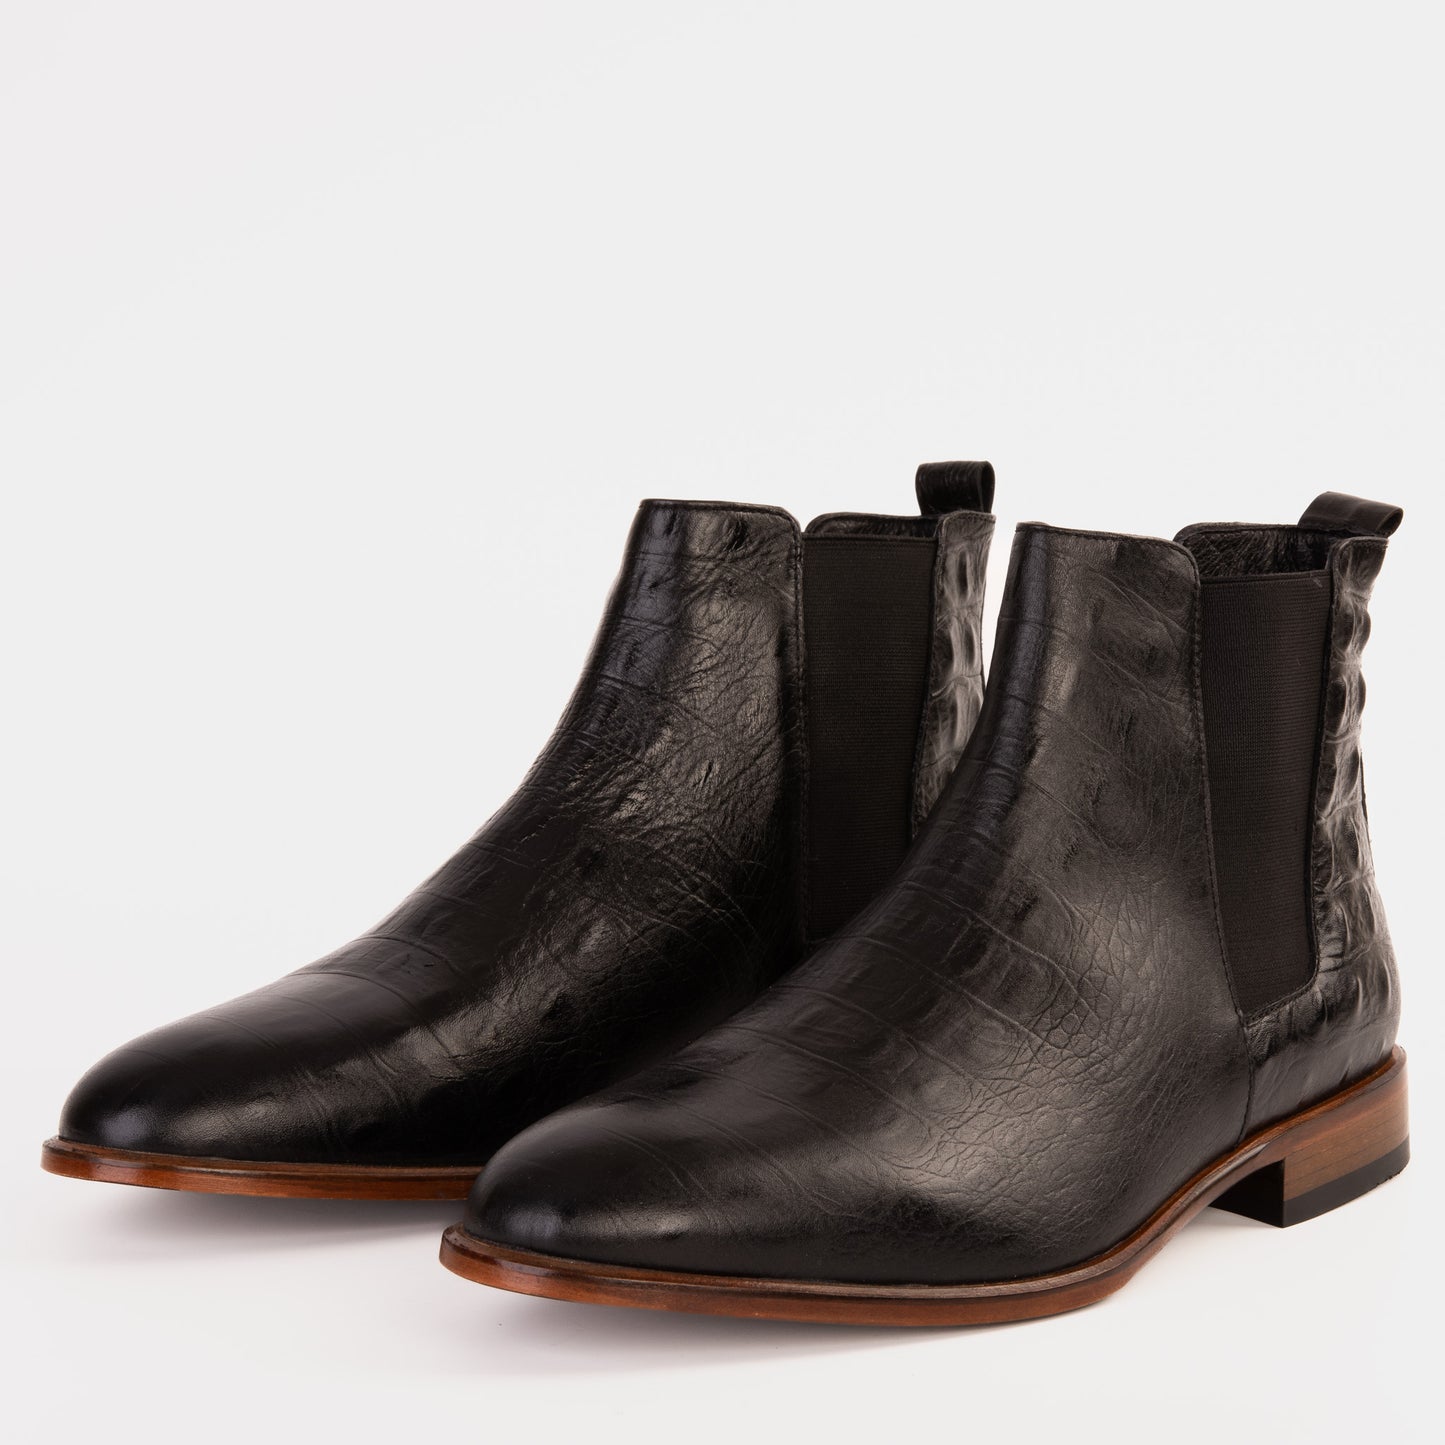 The Sirocco Black Leather Chelsea Dress Men Boot